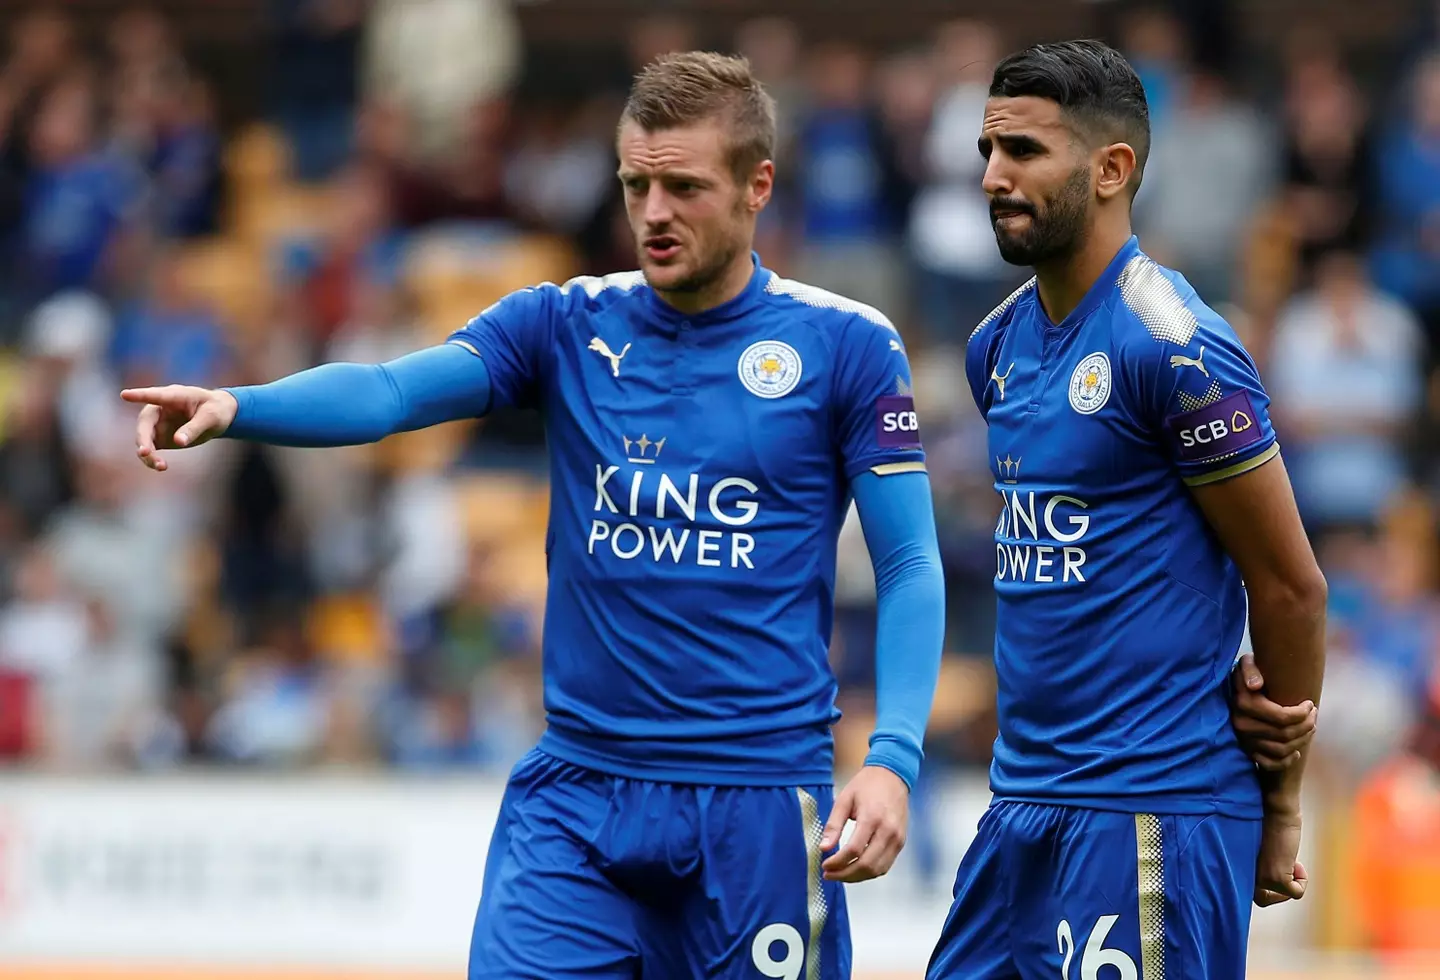 Jamie Vardy and Riyad Mahrez during their time at Leicester City. (Image